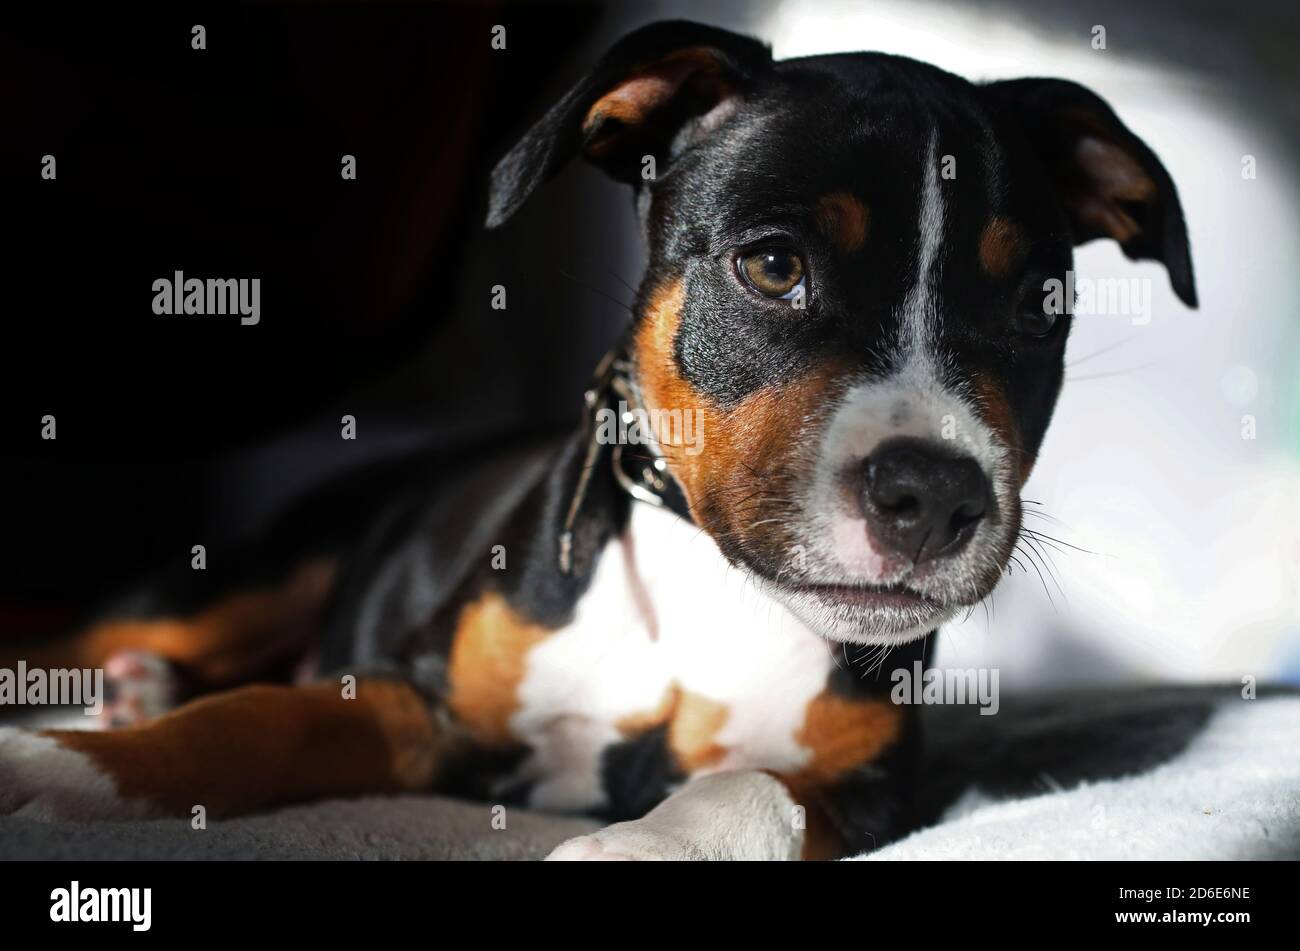 Birmingham Dogs Home High Resolution Stock Photography and Images - Alamy